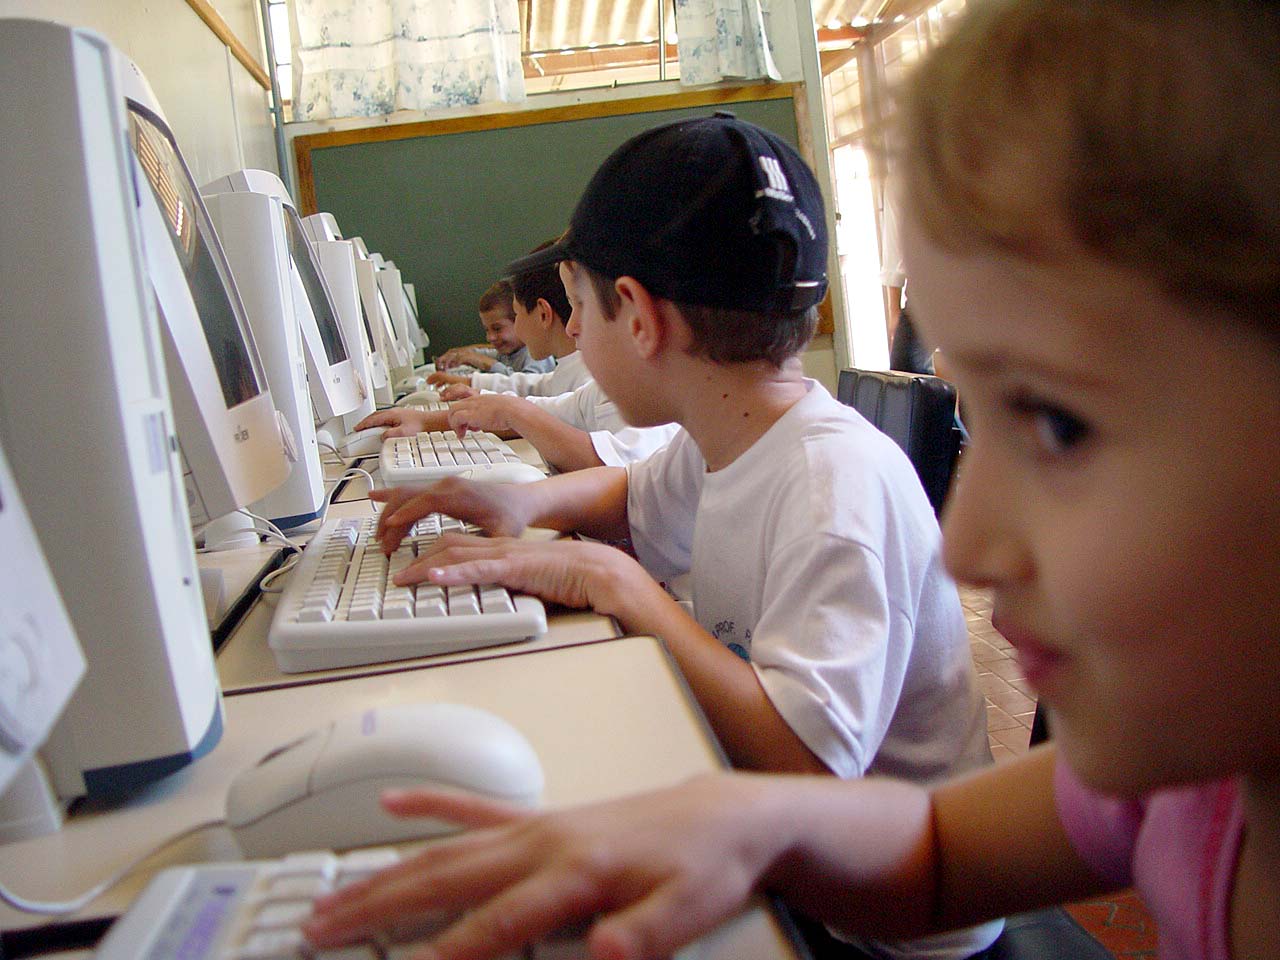 Coding might be one of the fundamental skills to teach our children